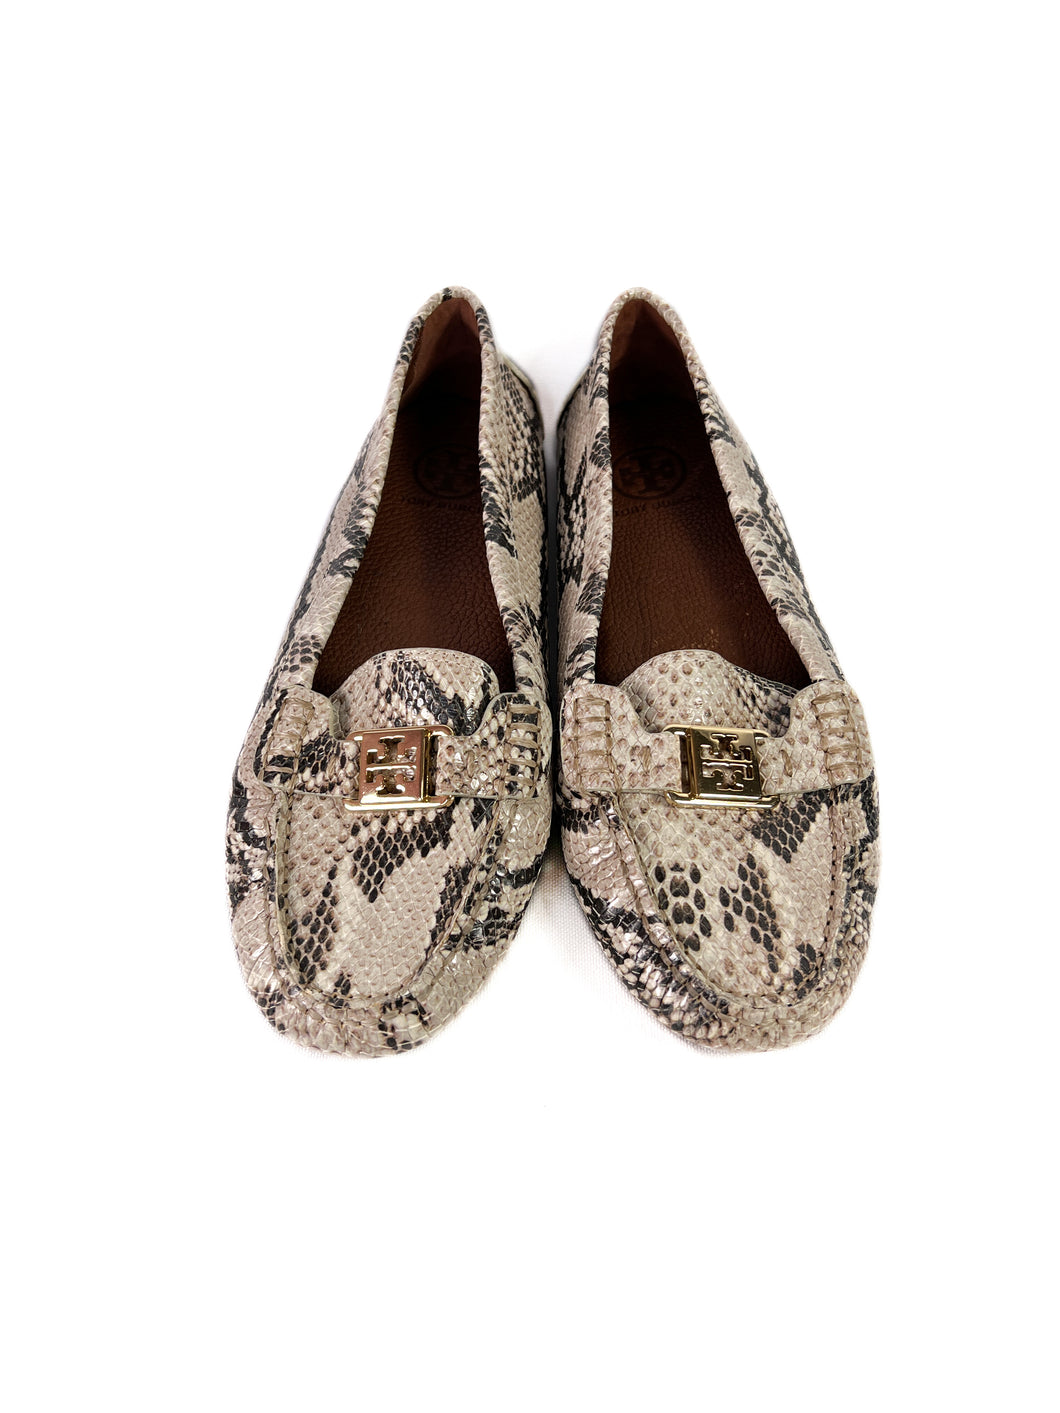 Tory Burch snake print leather loafers size 10.5 NEW **ONLINE ONLY**